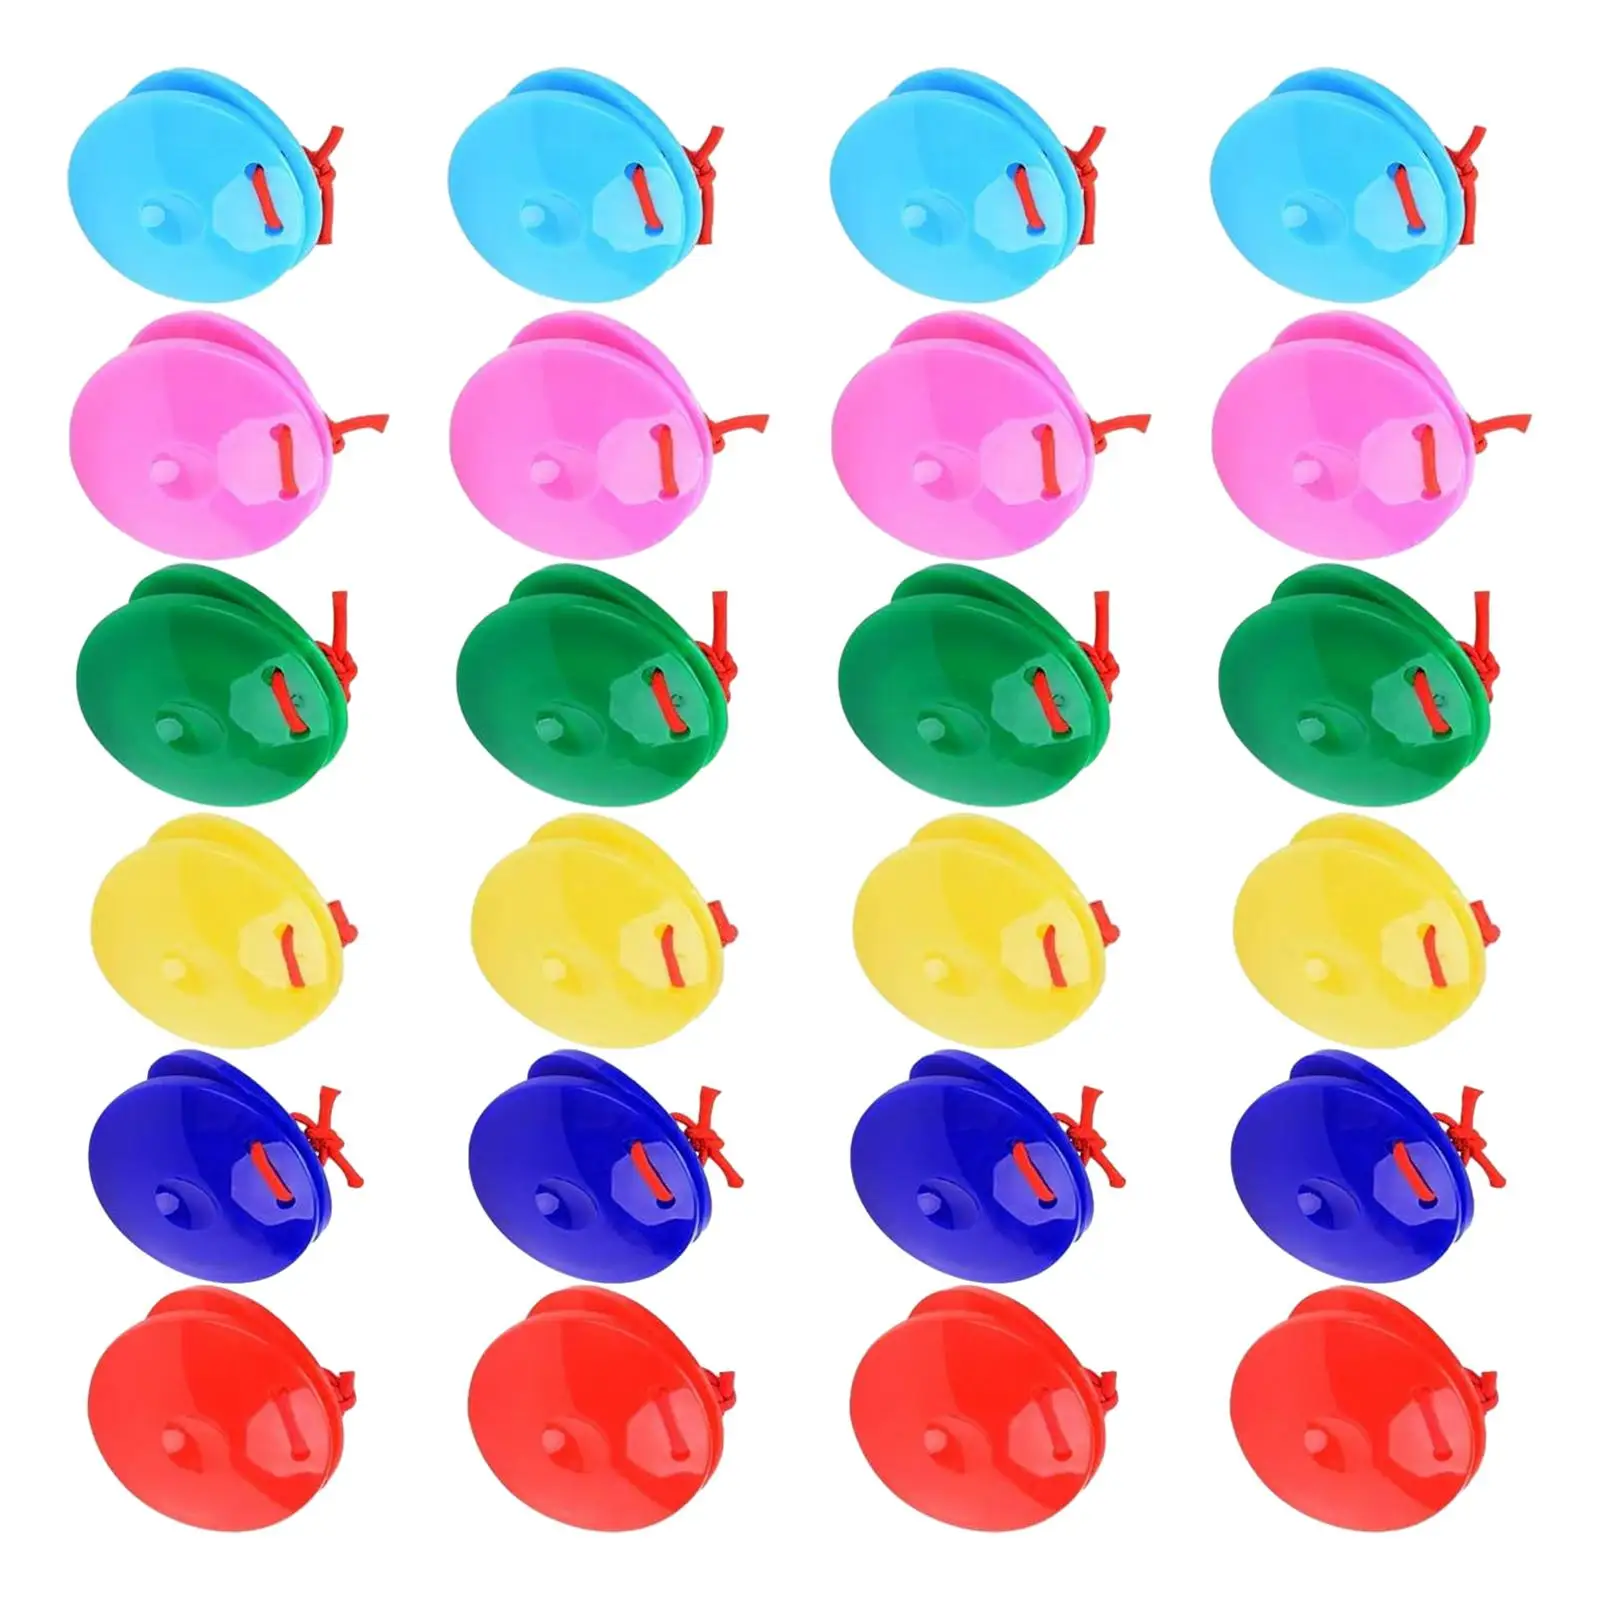 24Pcs Wooden Castanets Early Education Toys Musical Preschool Rhythm Toys Percussion Instrument for Children Boys Girls Kids